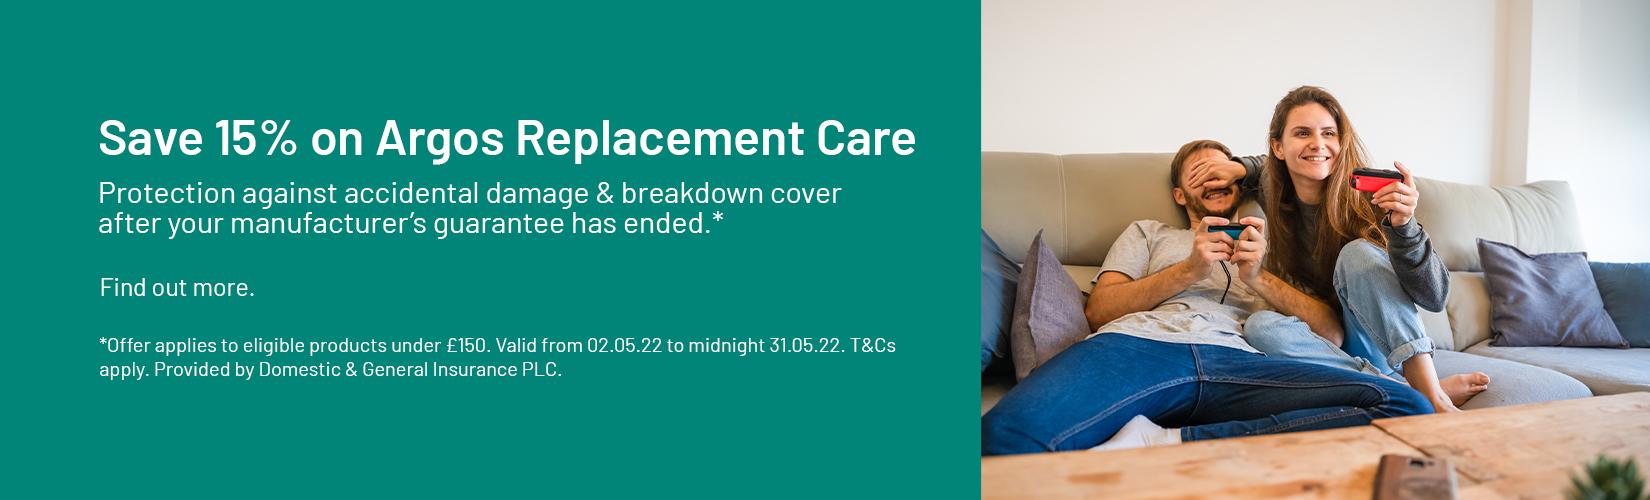 Save 15% on Argos Replacement Care. Protection against accidental damage & breakdown cover after your manufacturer’s guarantee has ended.* Find out more. *Offer applies to eligible products under £150. Valid from 02.05.22 to midnight 31.05.22. T&Cs apply. Provided by Domestic & General Insurance PLC.